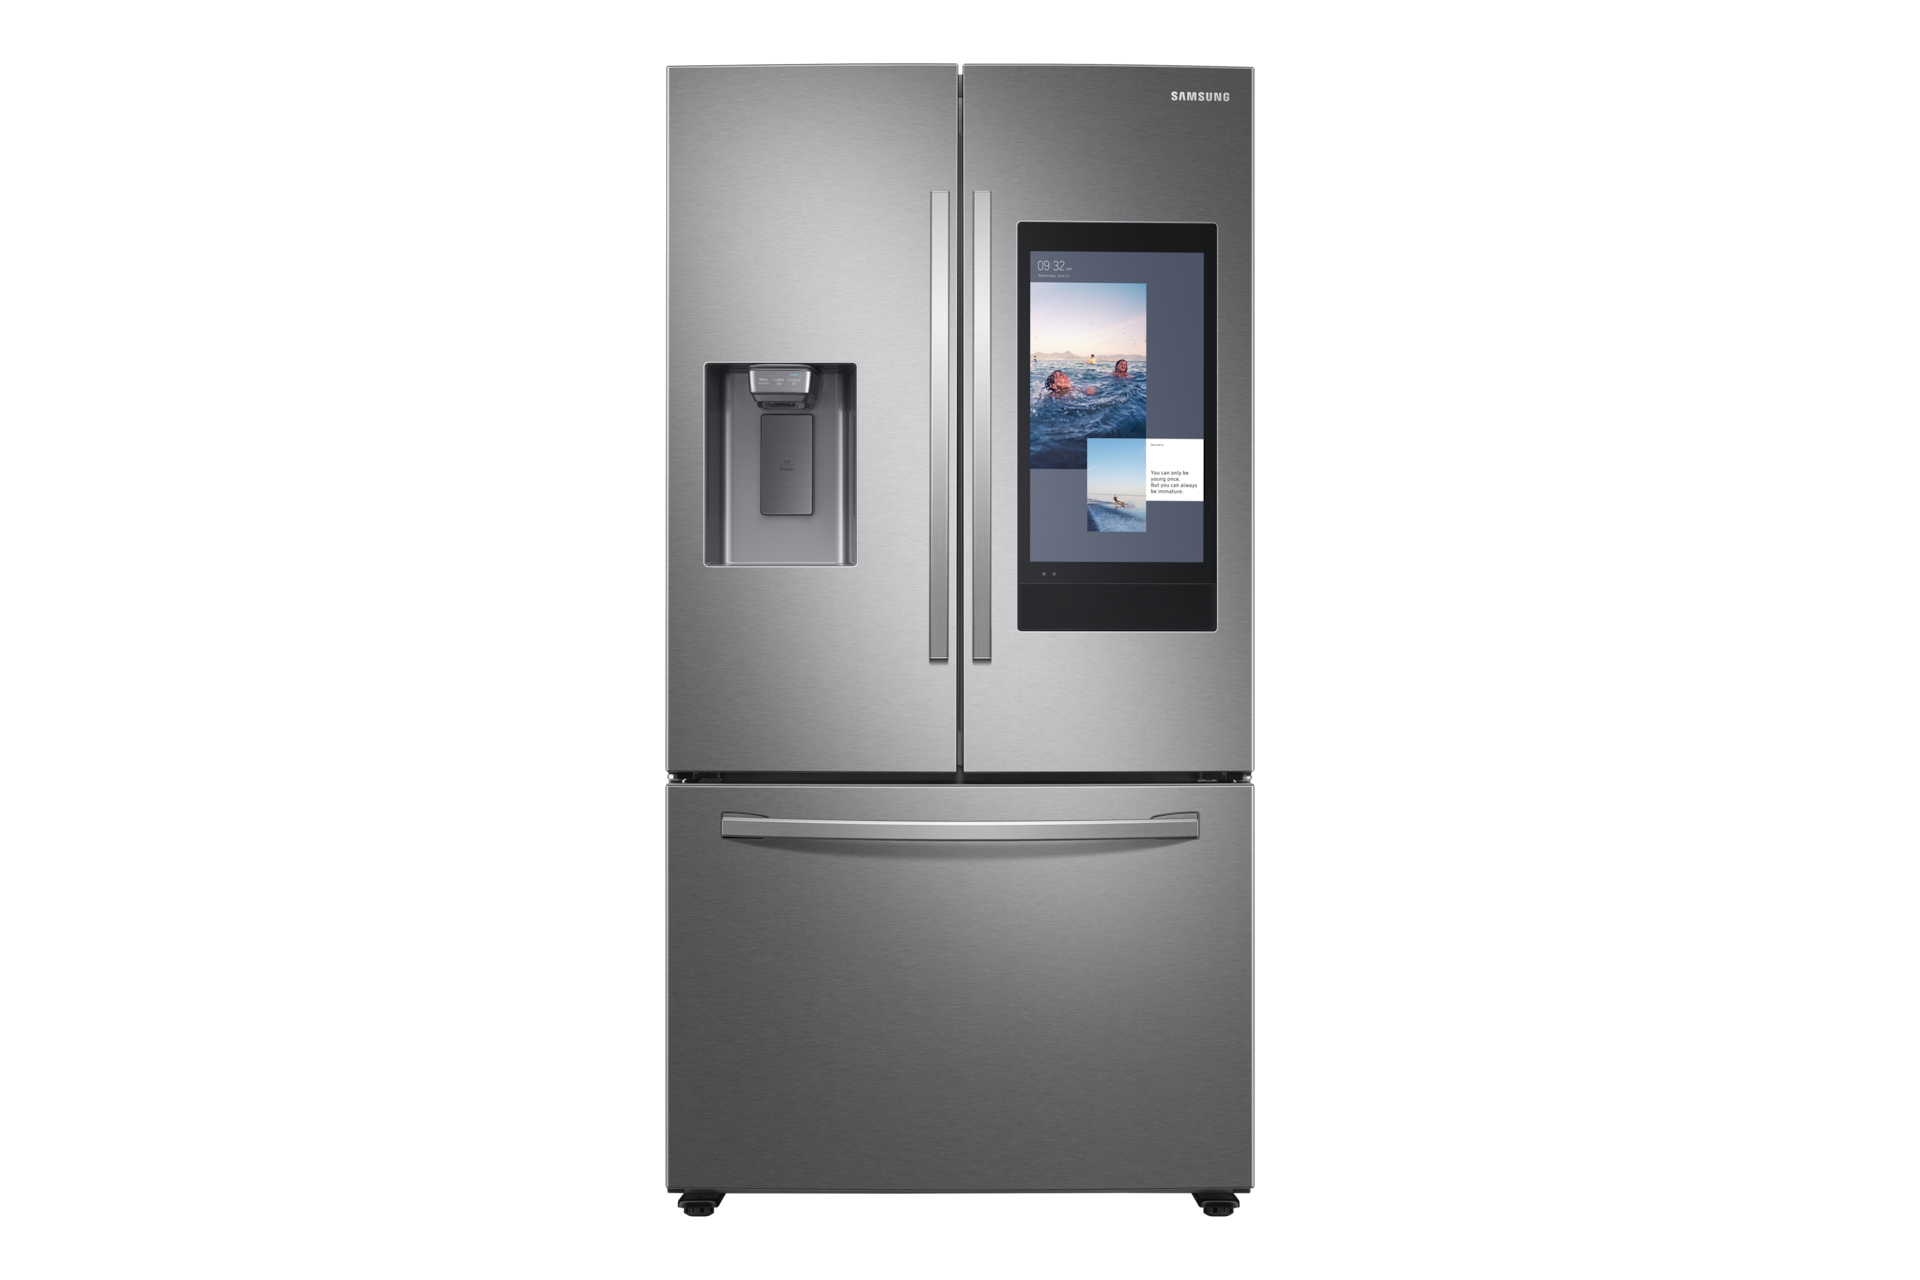 Samsung smart fridge with Bixby launched in India: Price, specifications,  features